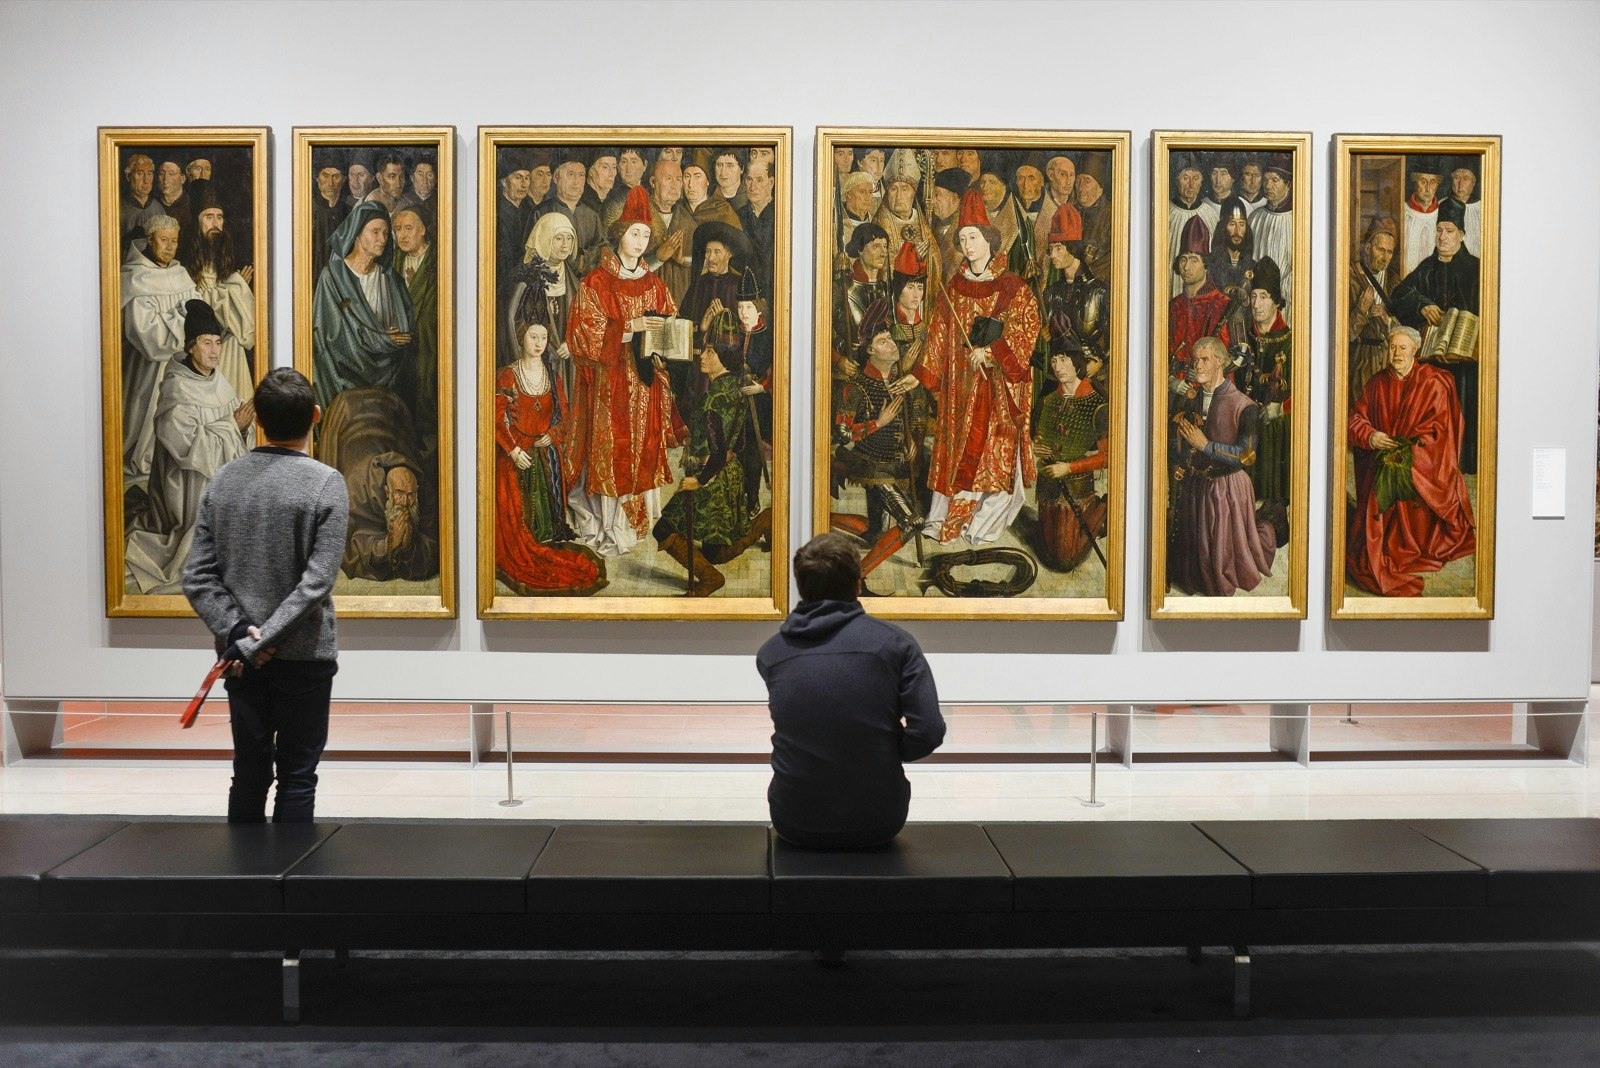 Two men look at a Renaissance painting in Lisbon's National Museum of Art 